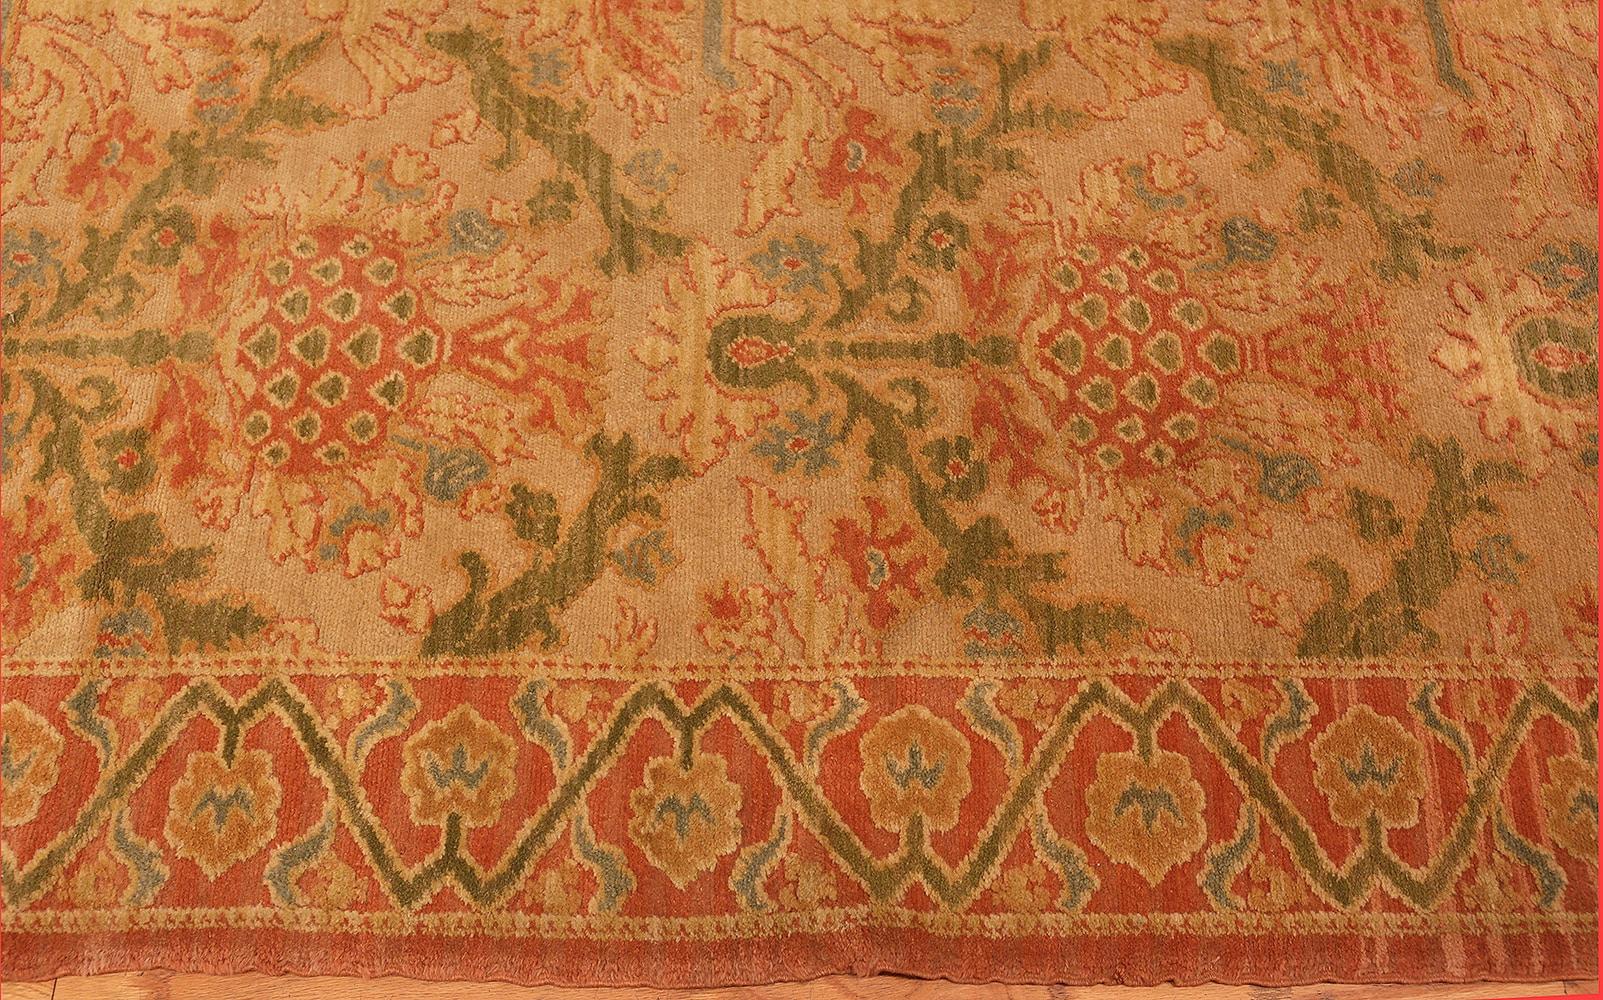 A beautiful soft and decorative room size vintage Spanish rug, country of origin: Spain, circa 1940's. Size: 8 ft 2 in x 11 ft 6 in (2.49 m x 3.51 m)

This lovely, soft rug from Spain from the 1940’s has an all-over design laid out in a formal